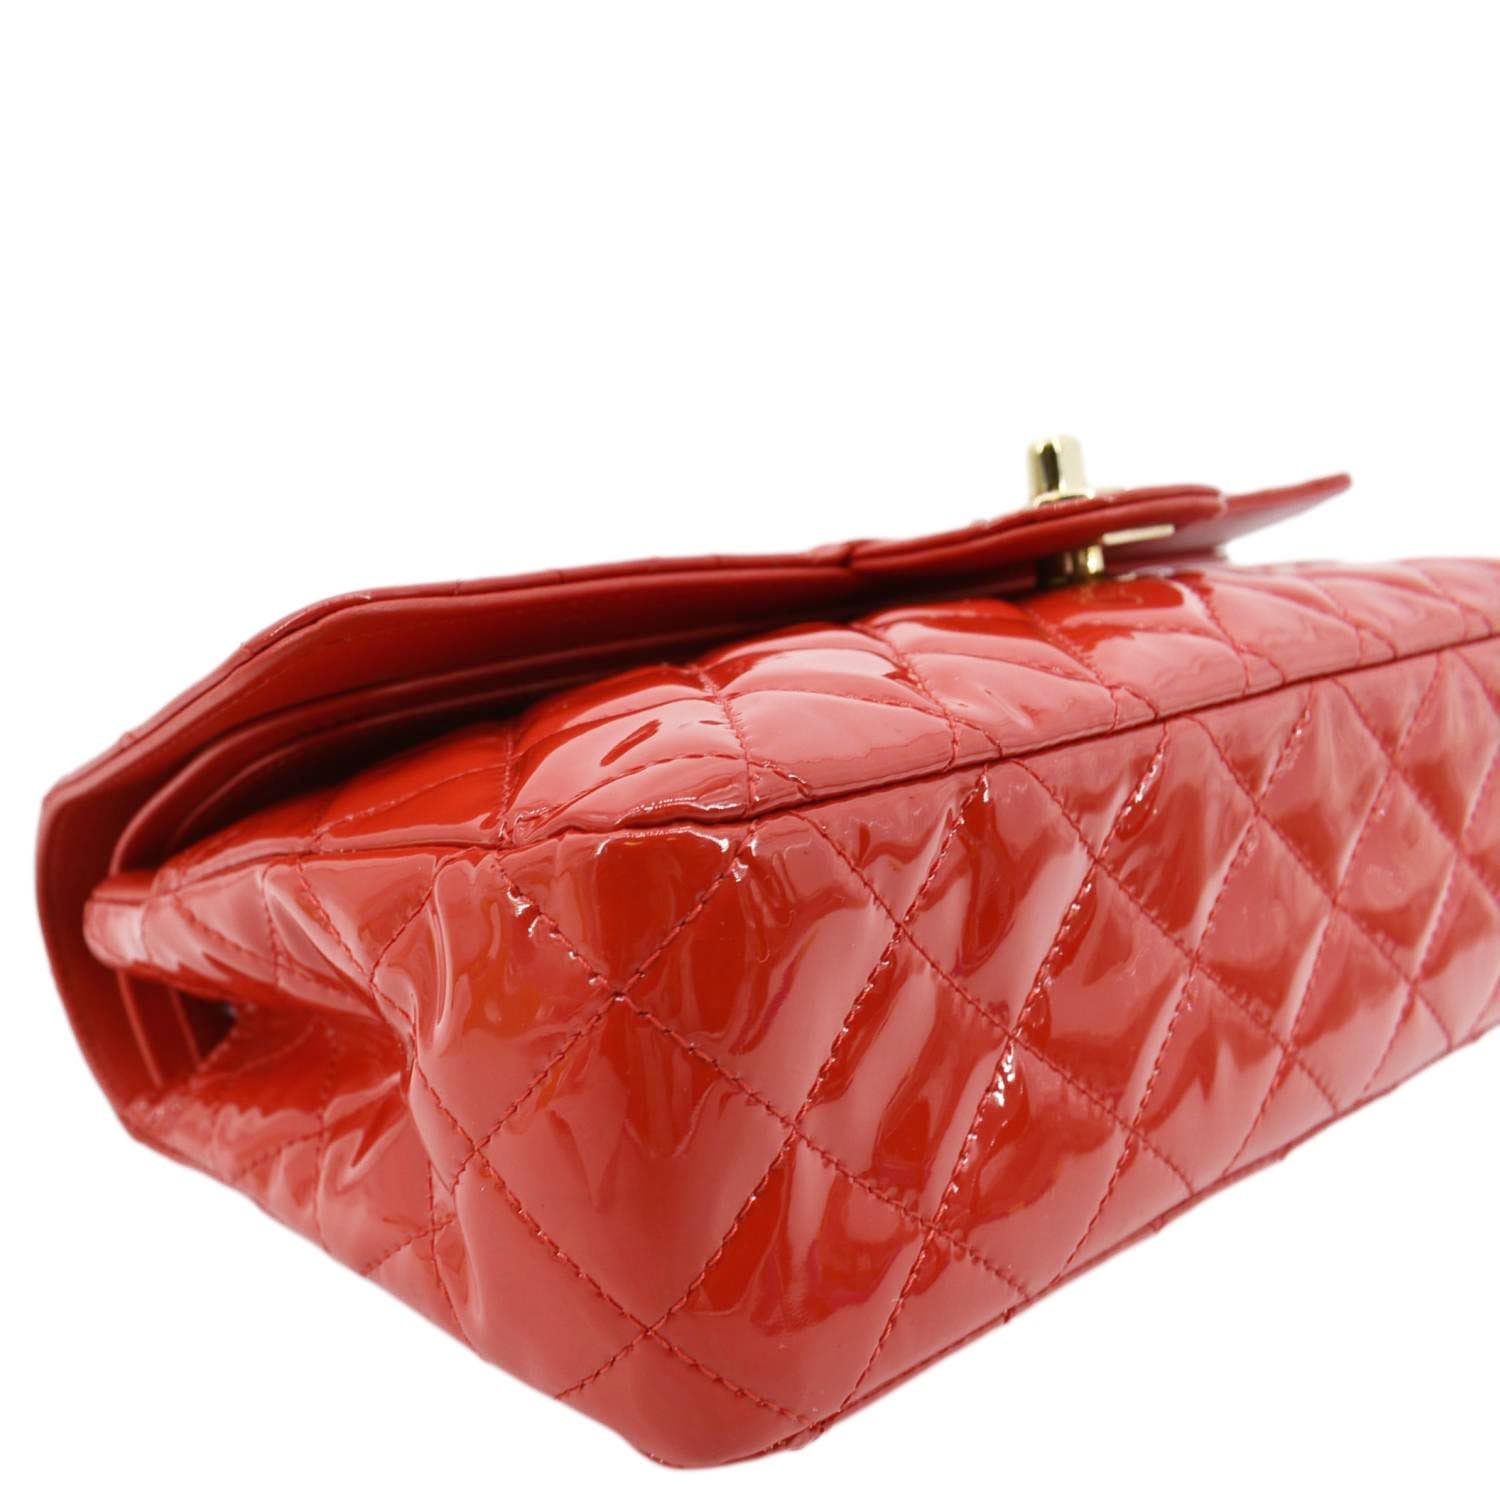 red chanel classic flap caviar